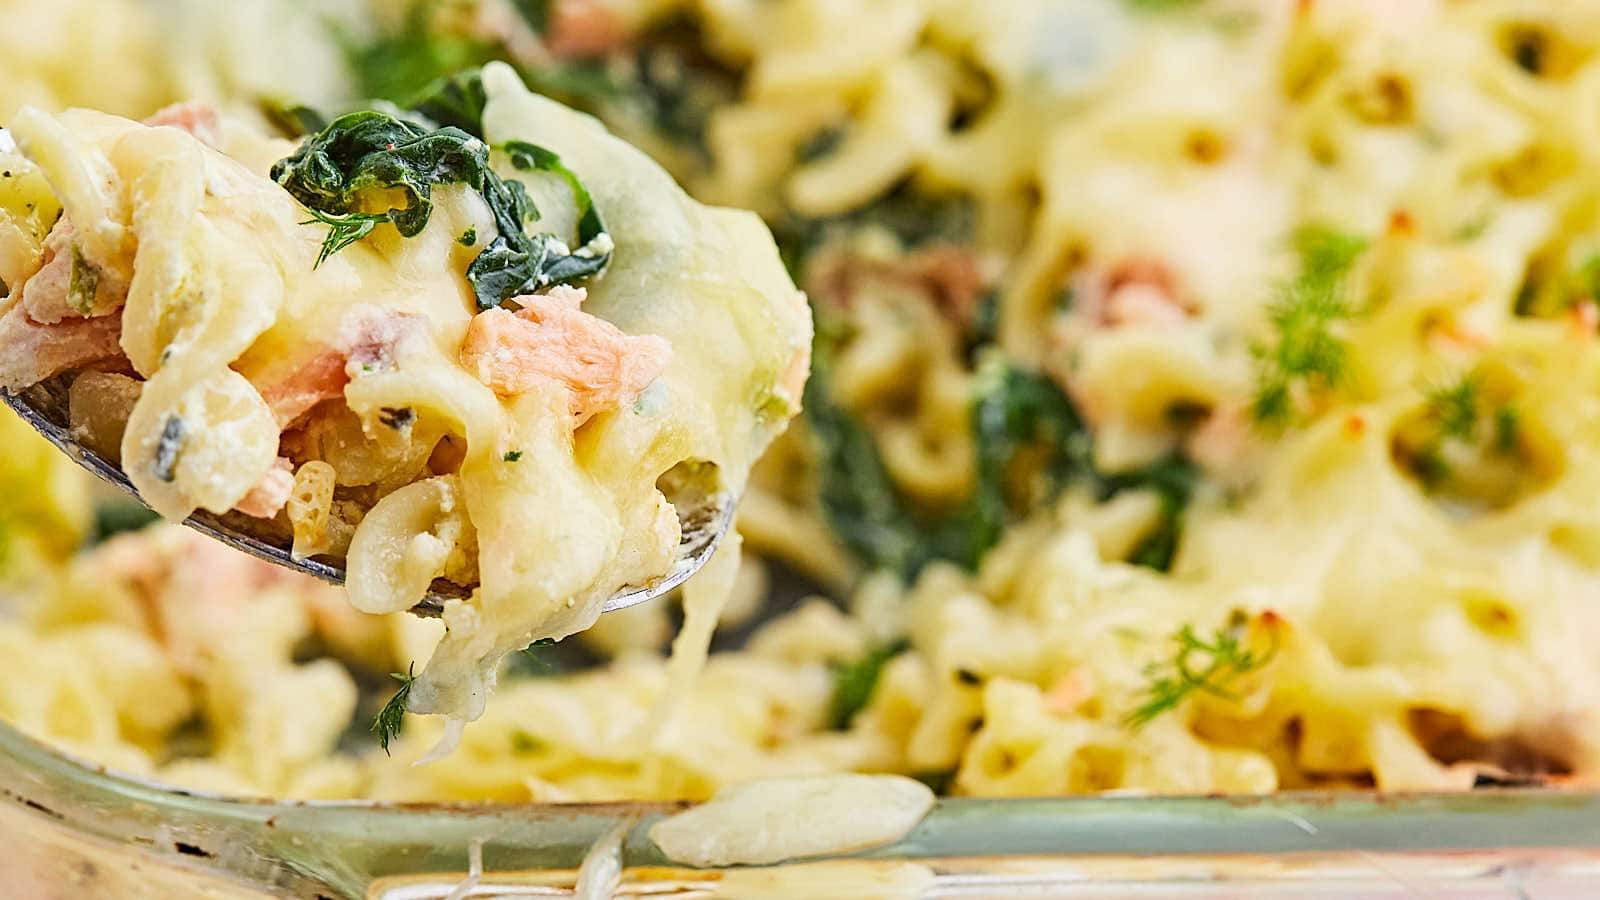 <p>Get ready to wow your friends and family with this creamy, cheesy Salmon Casserole. Imagine tender salmon, wholesome spinach, and gooey cheese all melding together in a dreamy cream sauce.</p><p><strong>Get the Recipe: <a href="https://cheerfulcook.com/salmon-casserole/" rel="noreferrer noopener">Salmon Casserole</a></strong></p>